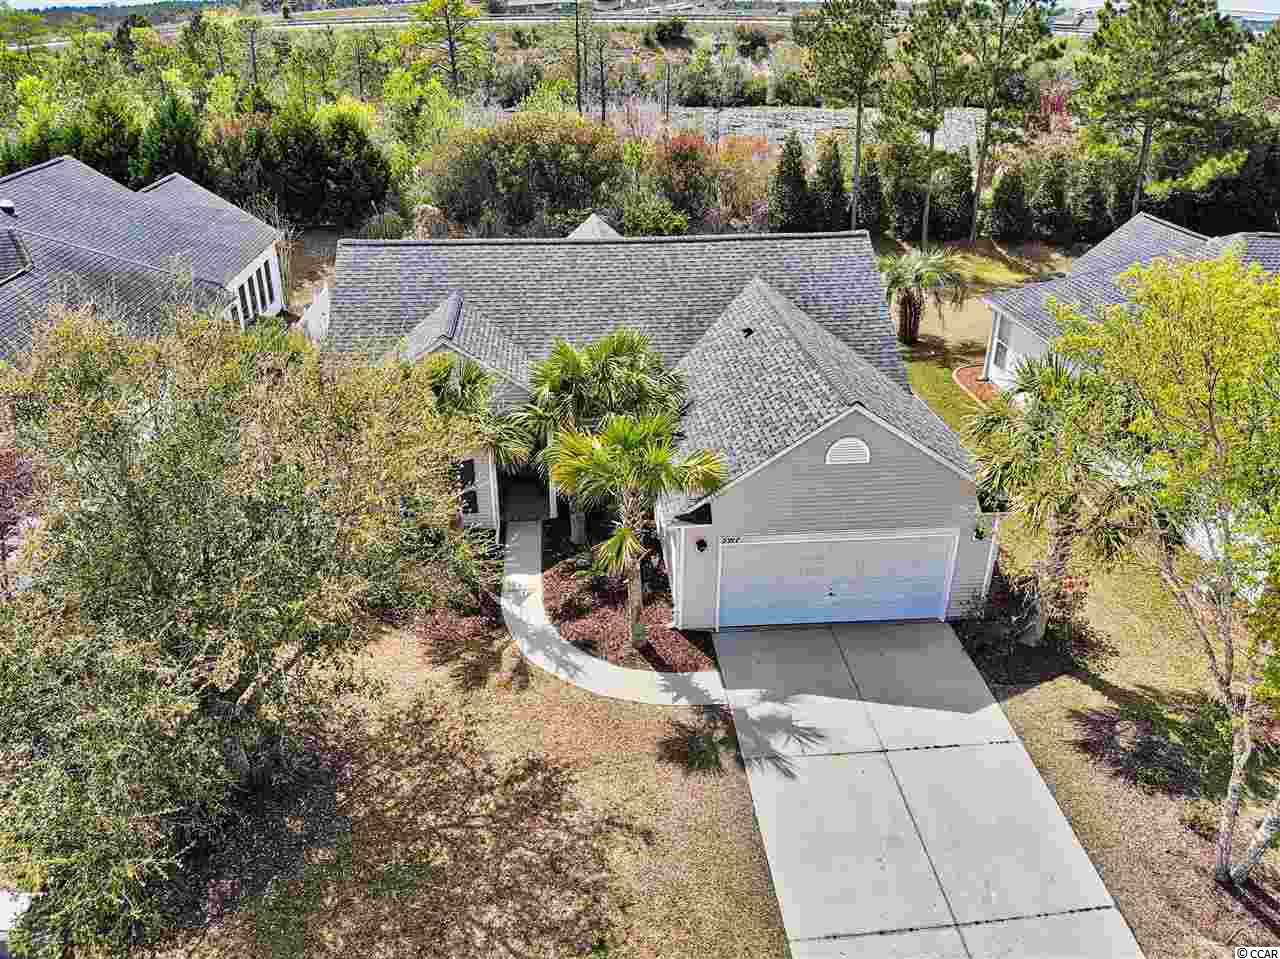 5917 Mossy Oaks Dr. North Myrtle Beach, SC 29582